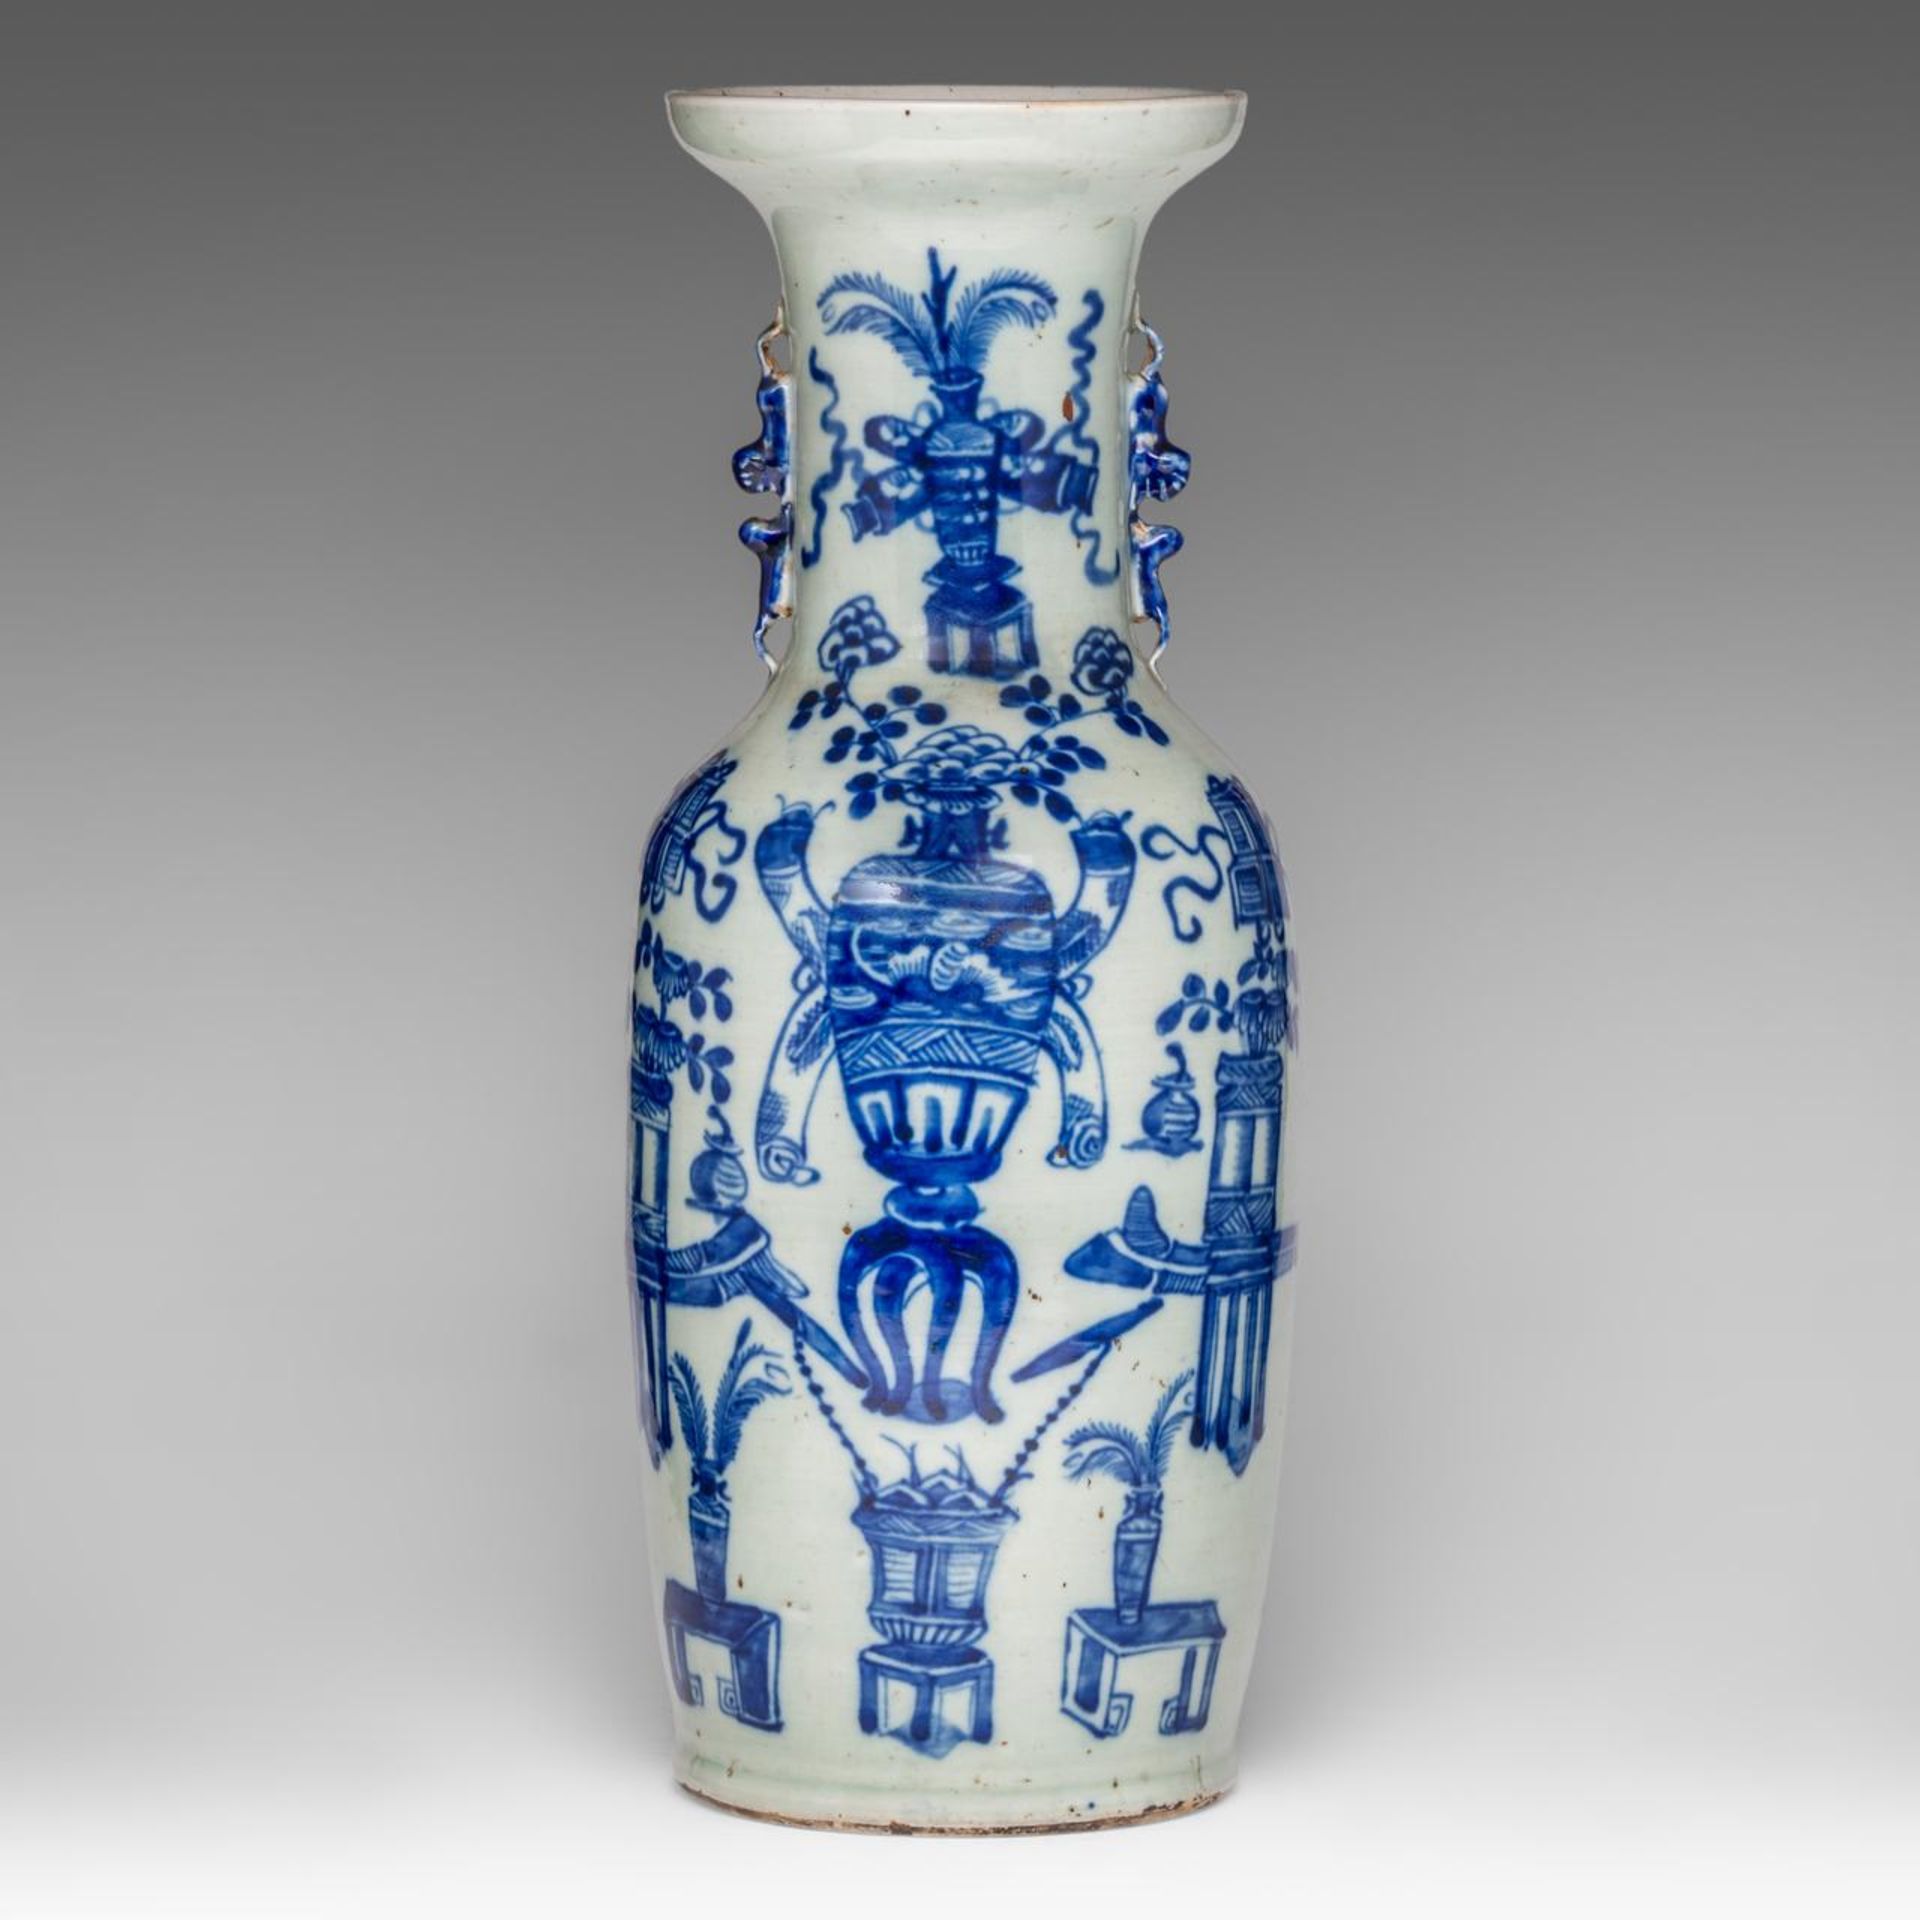 A Chinese blue and white on celadon ground 'Antiquities' vase, 19thC, H 57 cm